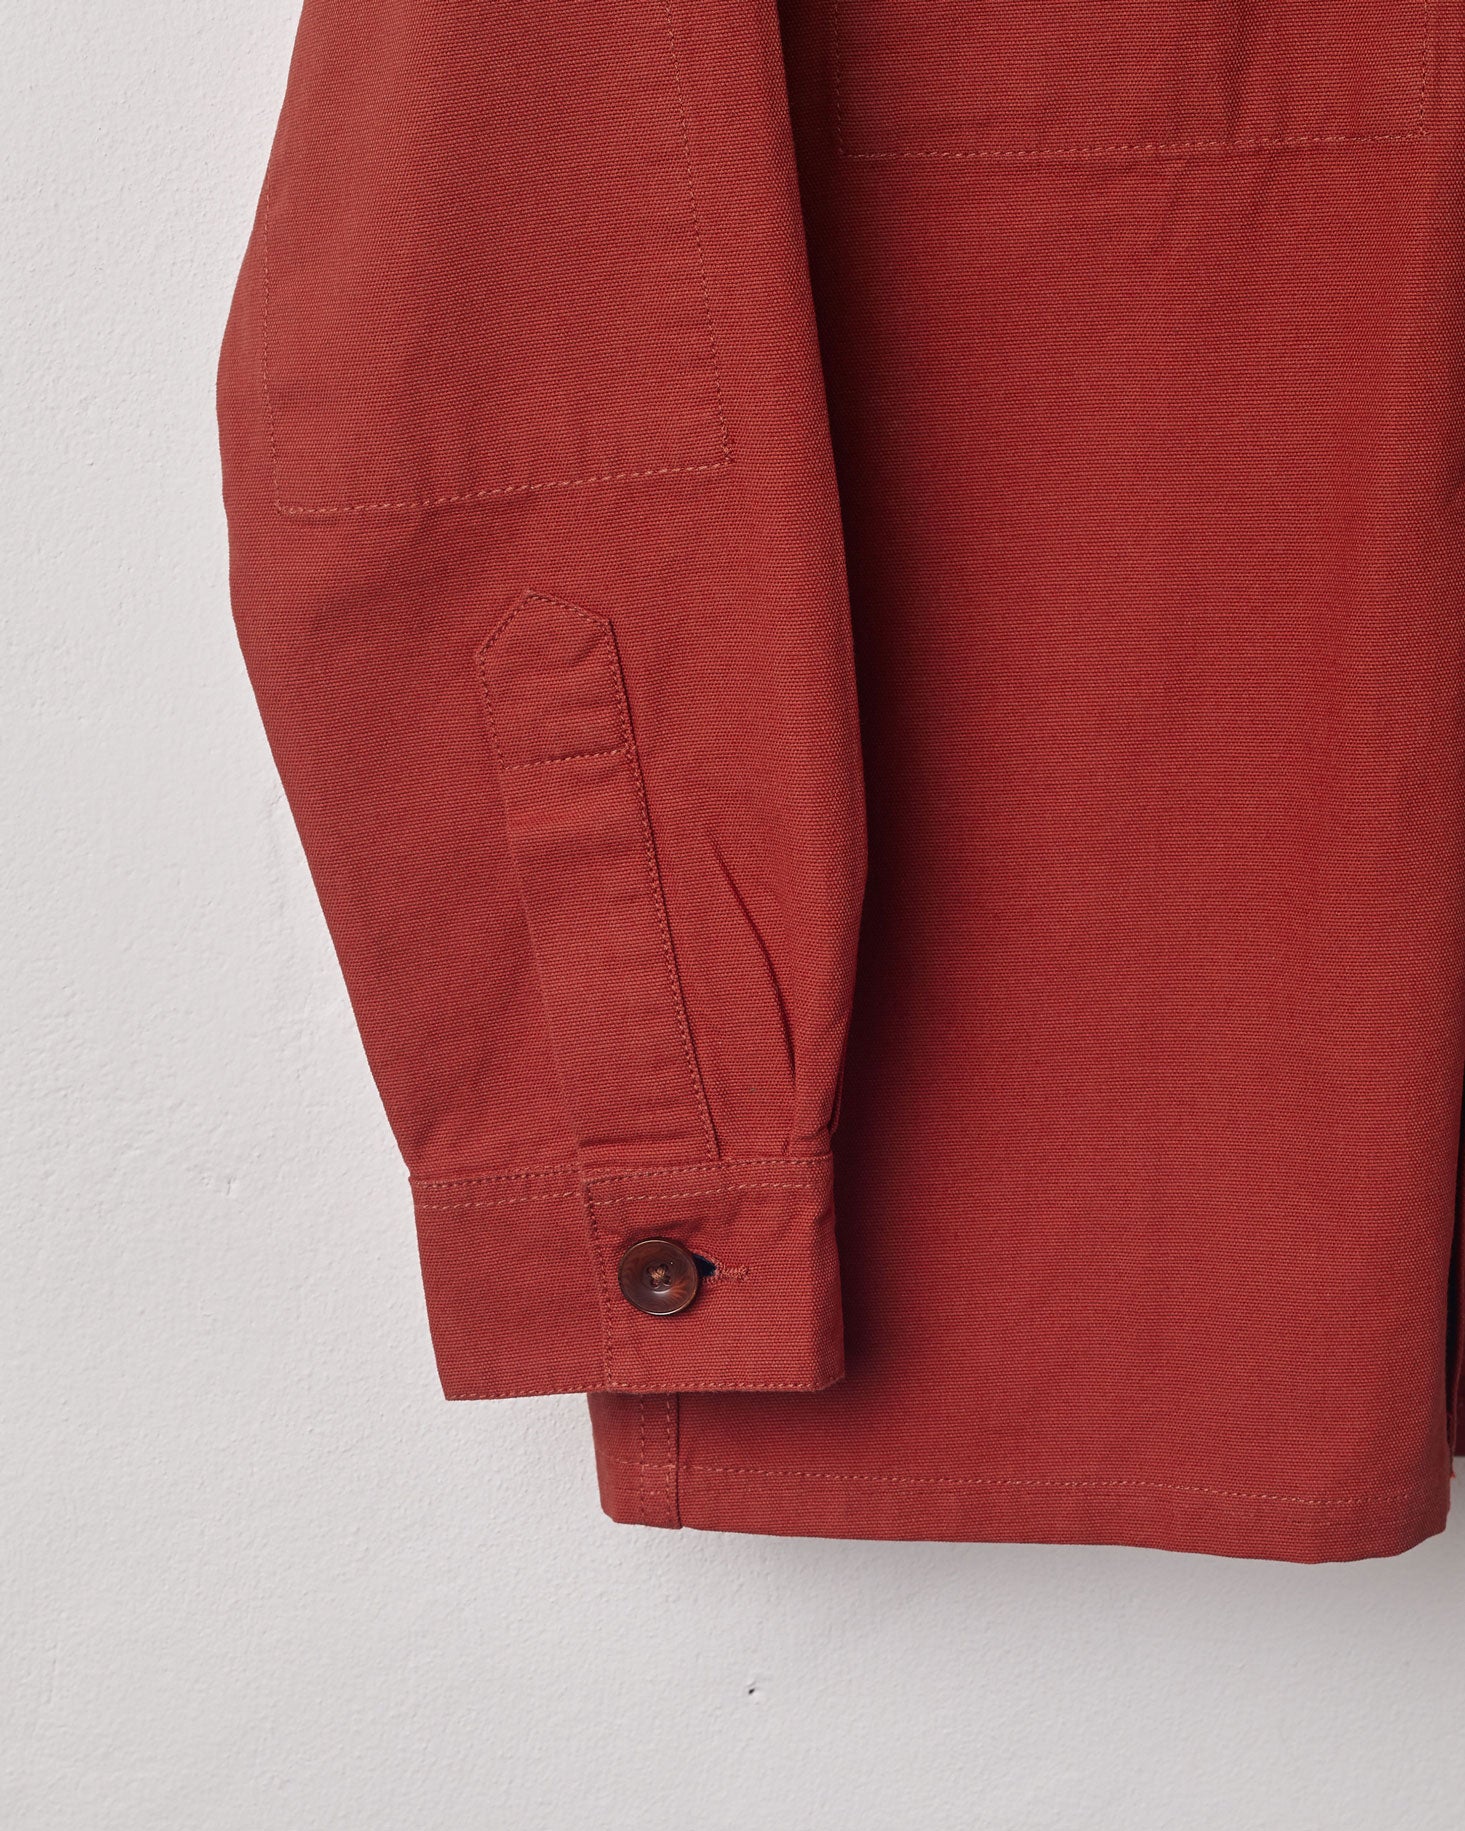 View of the mid-section and sleeve of the #3003 Uskees button-down work shirt in terracotta-red with focus on cuff, placket and corozo buttons.